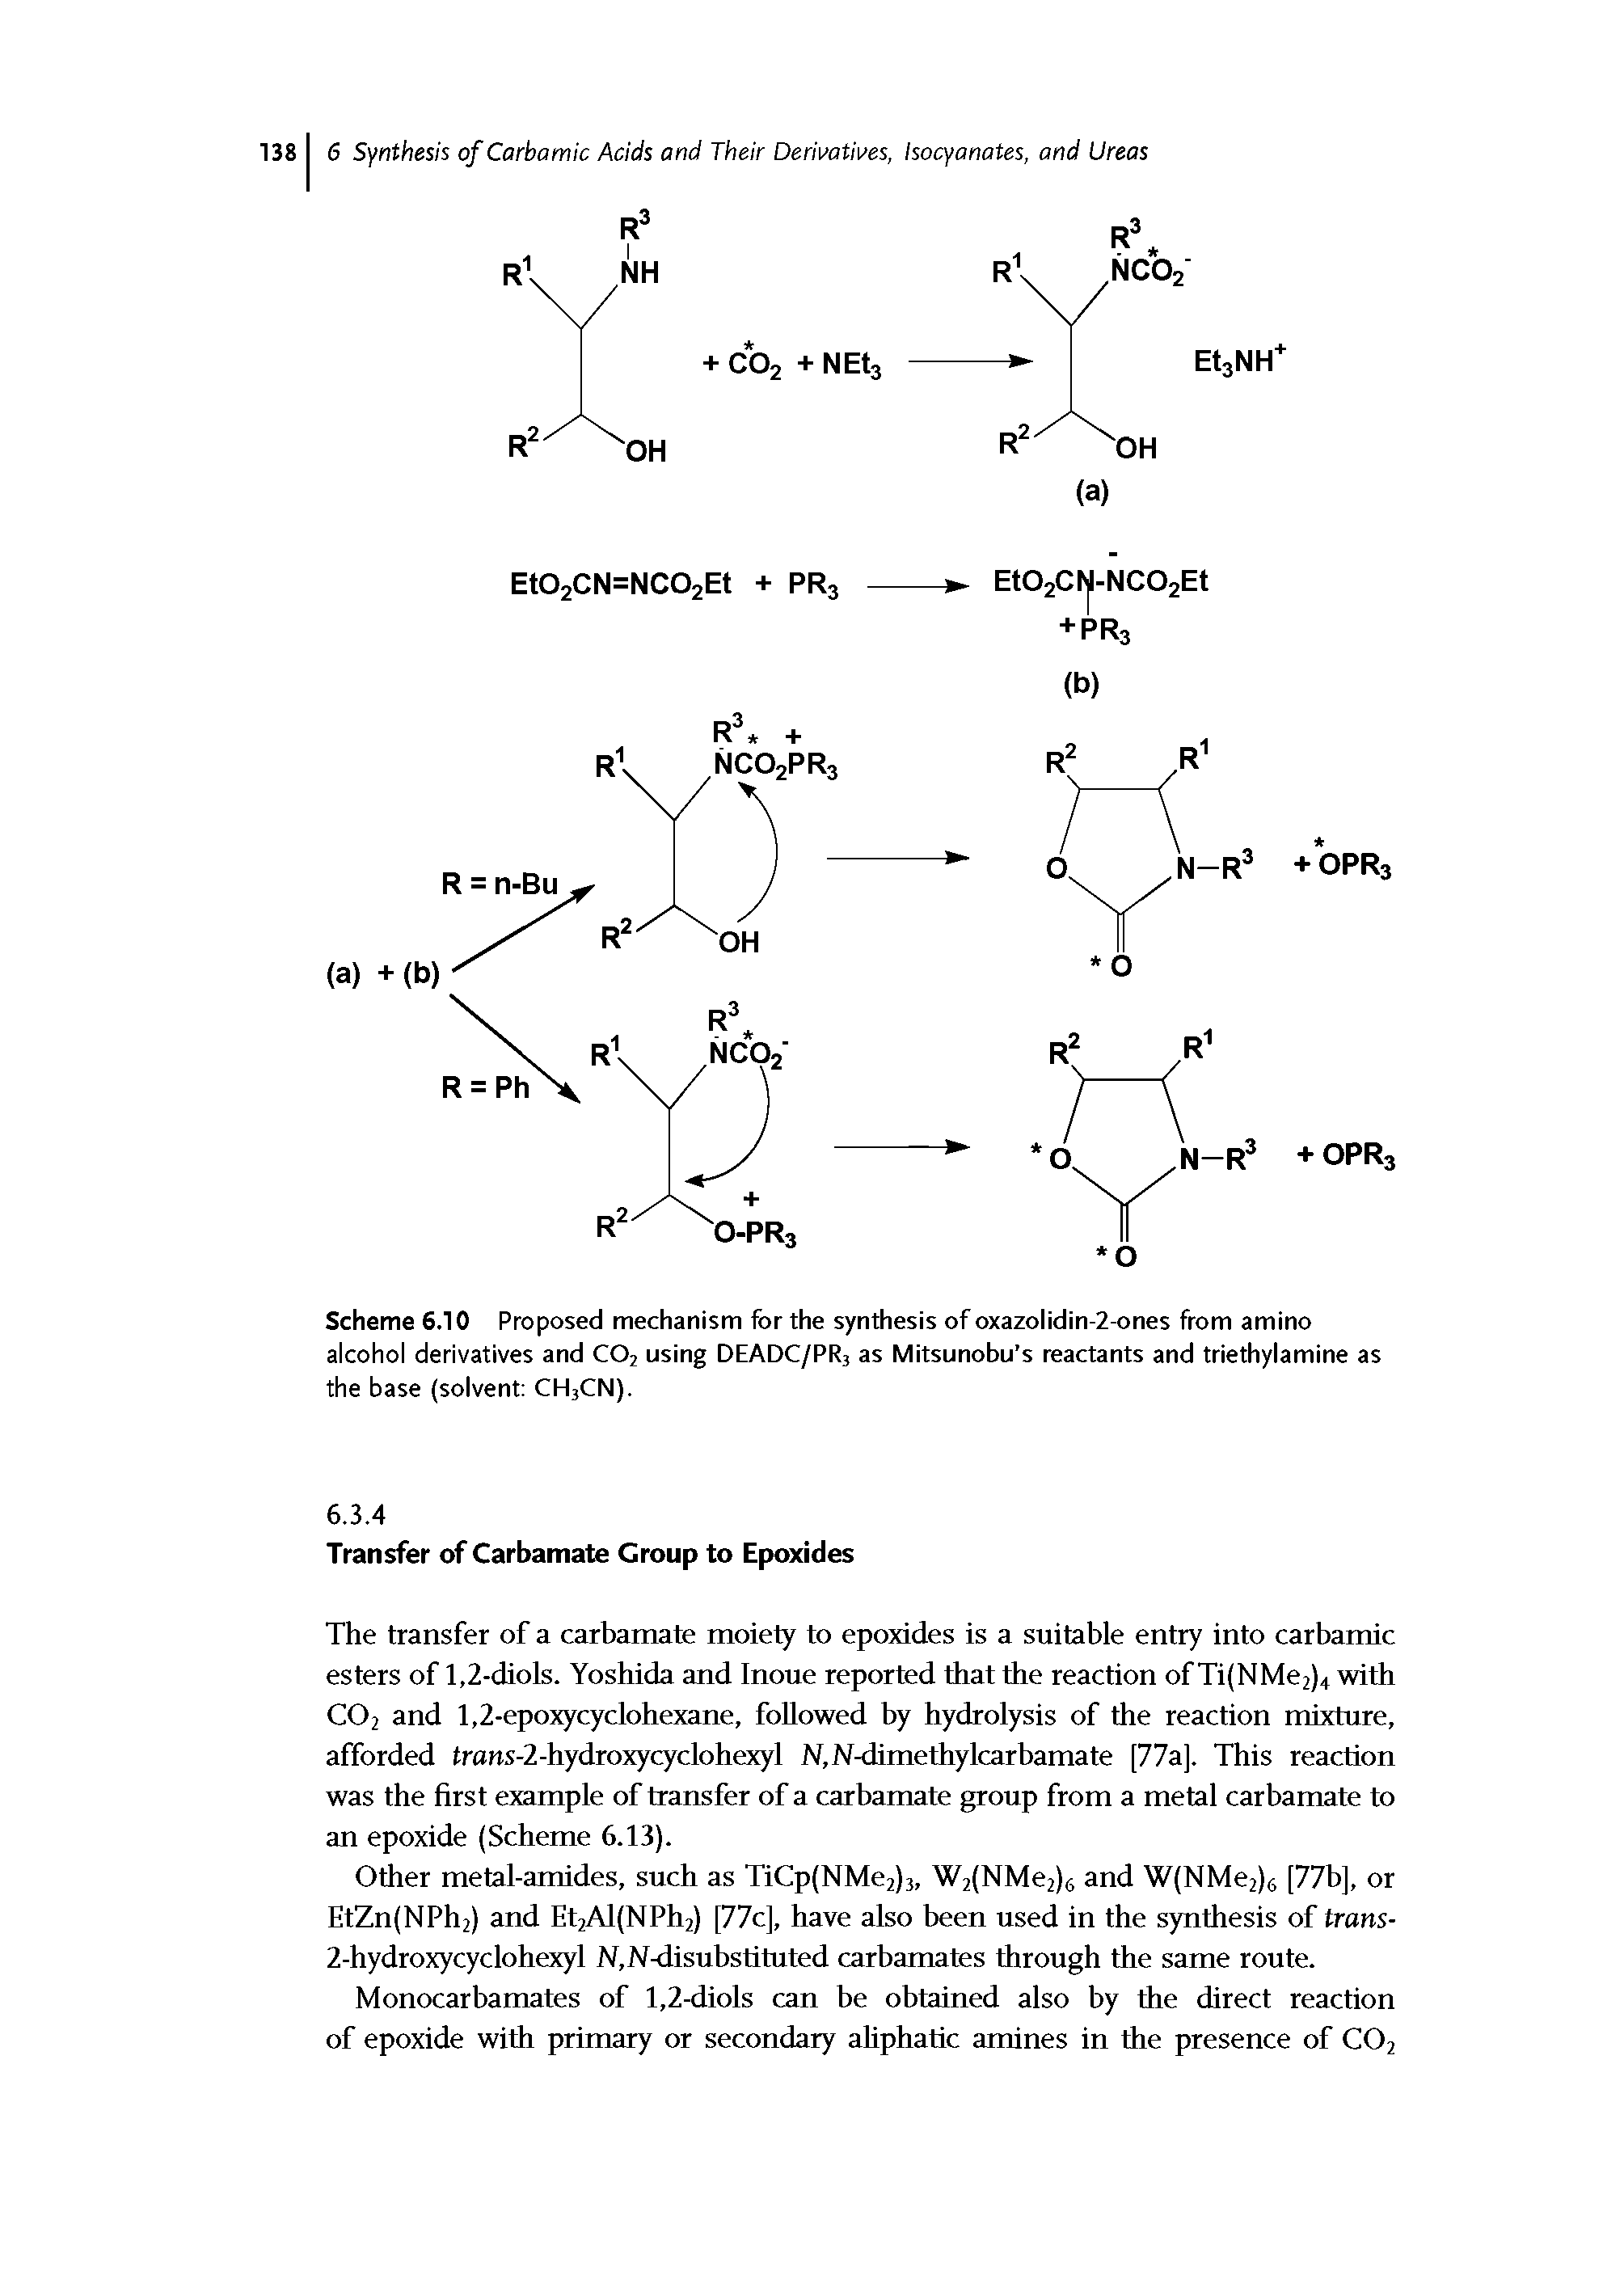 Scheme 6.10 Proposed mechanism for the synthesis of oxazolidin-2-ones from amino alcohol derivatives and C02 using DEADC/PR3 as Mitsunobu s reactants and triethylamine as the base (solvent CH3CN).